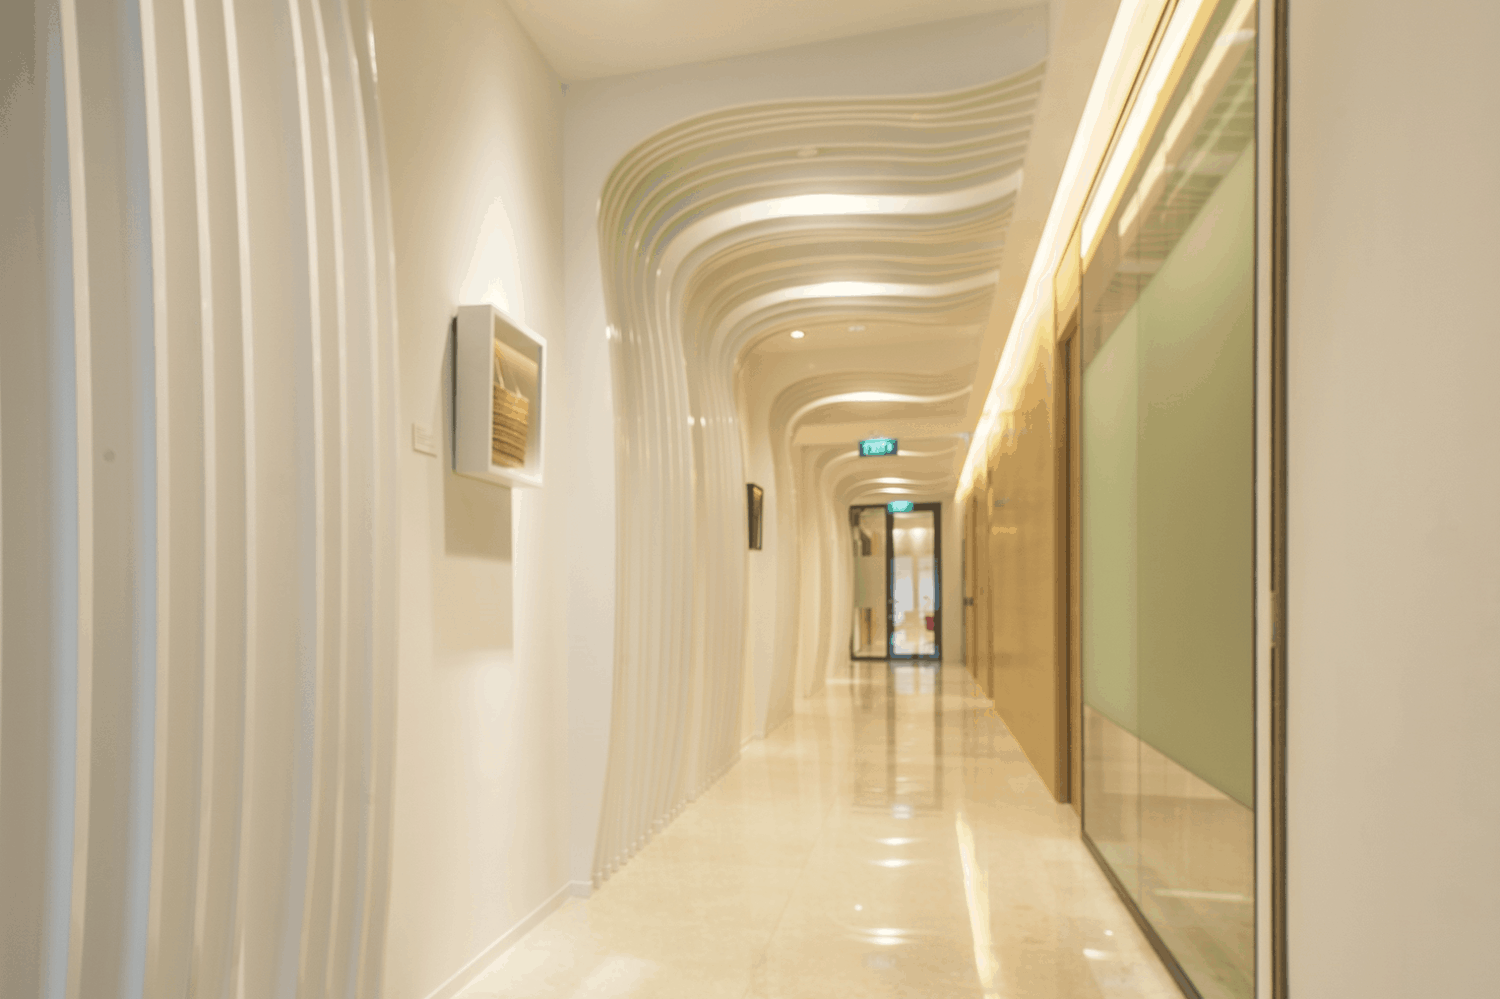 Ministry of Foreign Affairs and Trade office Singapore entrance design including white curved archways